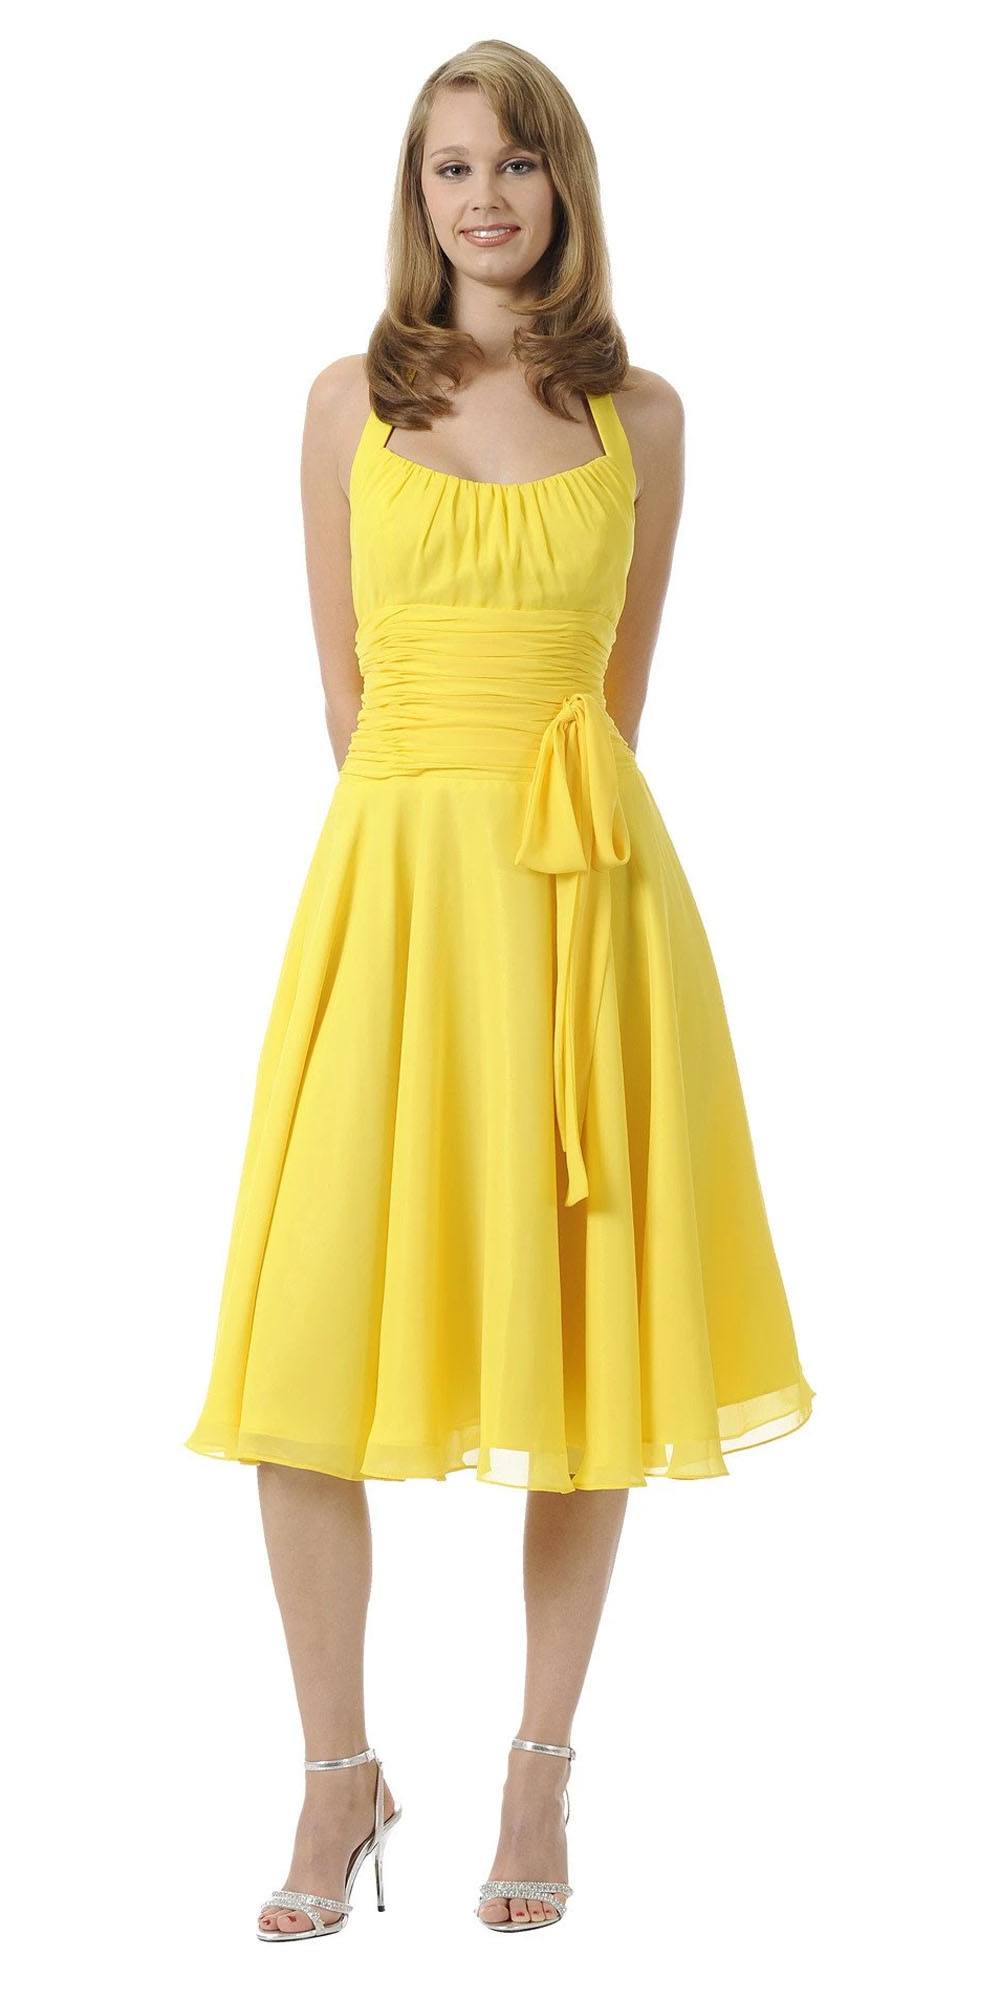 CLEARANCE - Halter Strap Yellow Chiffon Knee Length Dress With Bow (Size Small)